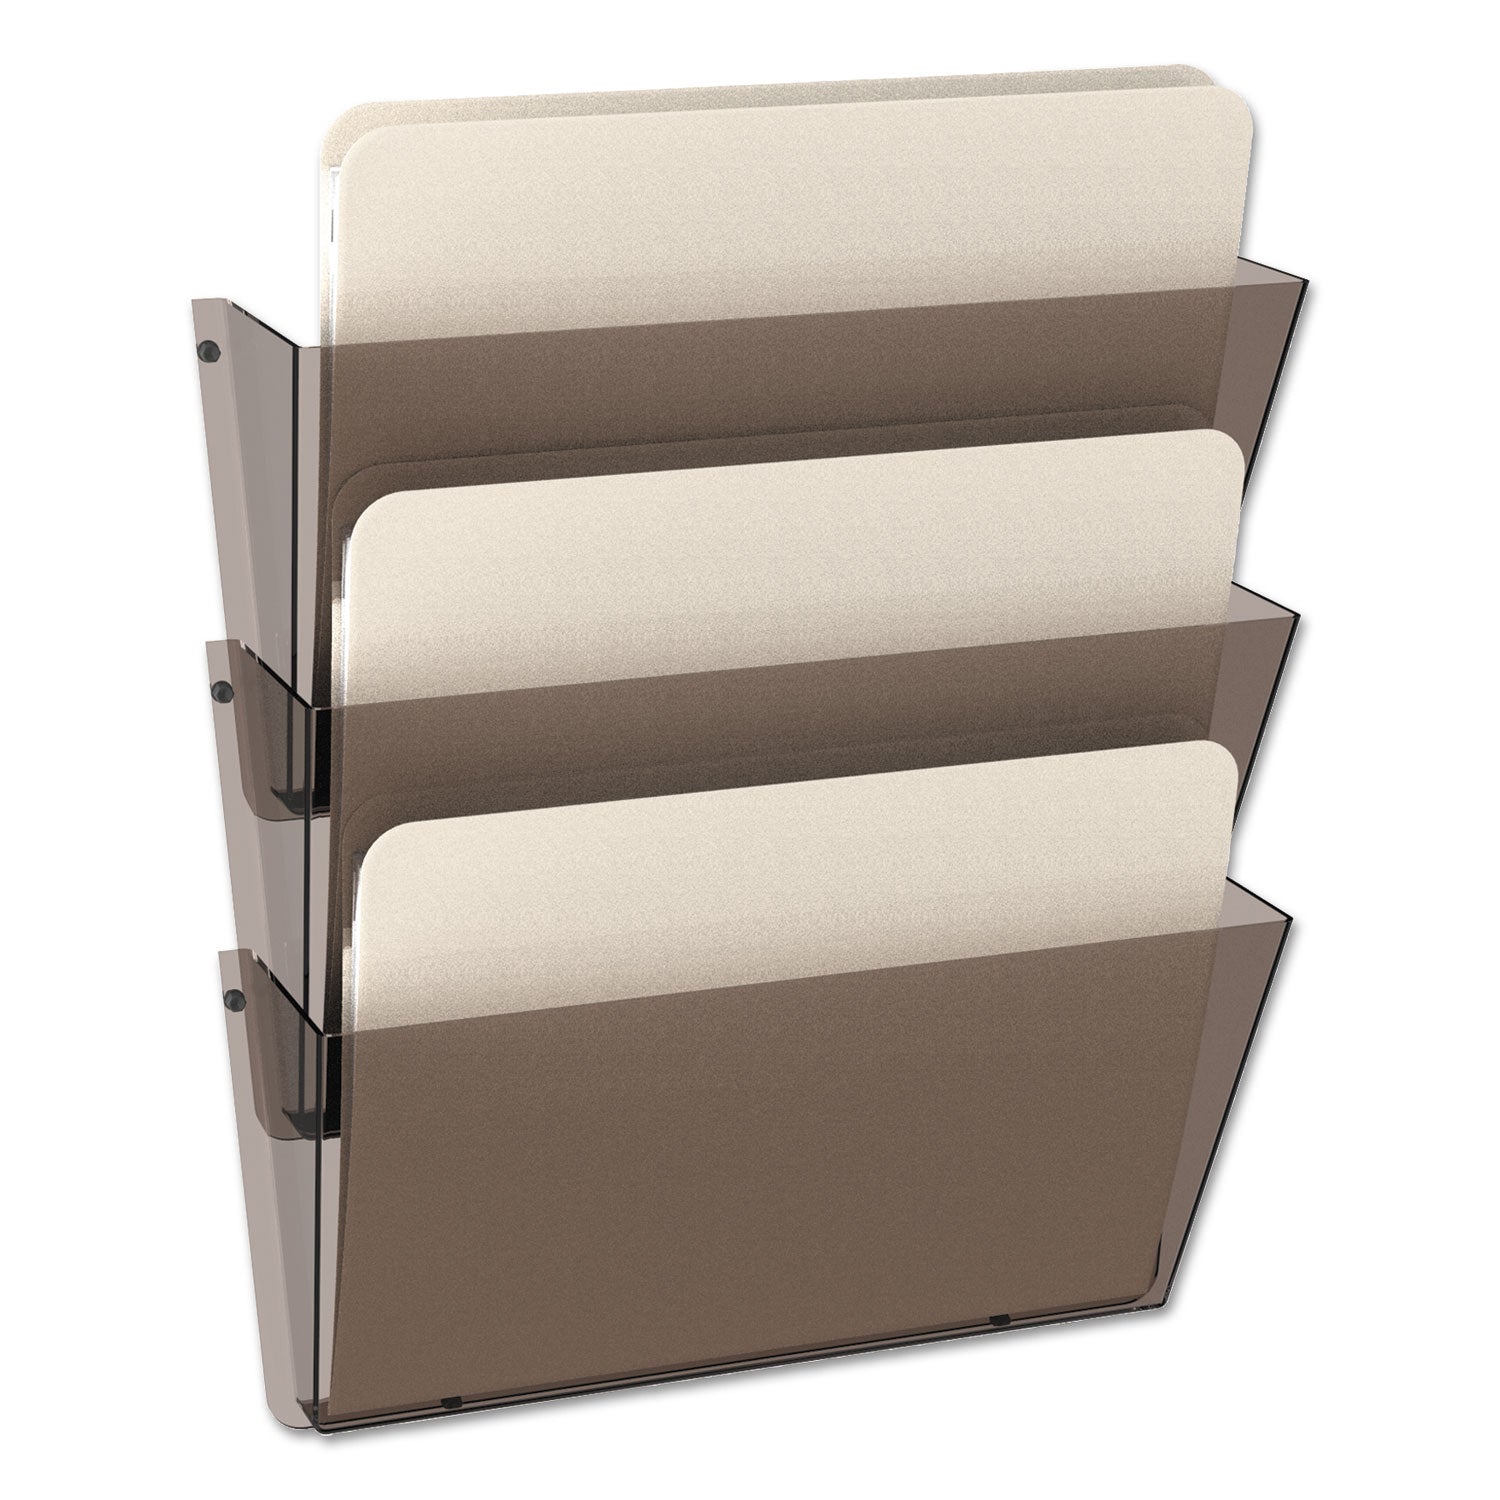 Unbreakable DocuPocket Wall File, 3 Sections, Letter Size, 14.5" x 3" x 6.5", Smoke, 3/Pack - 